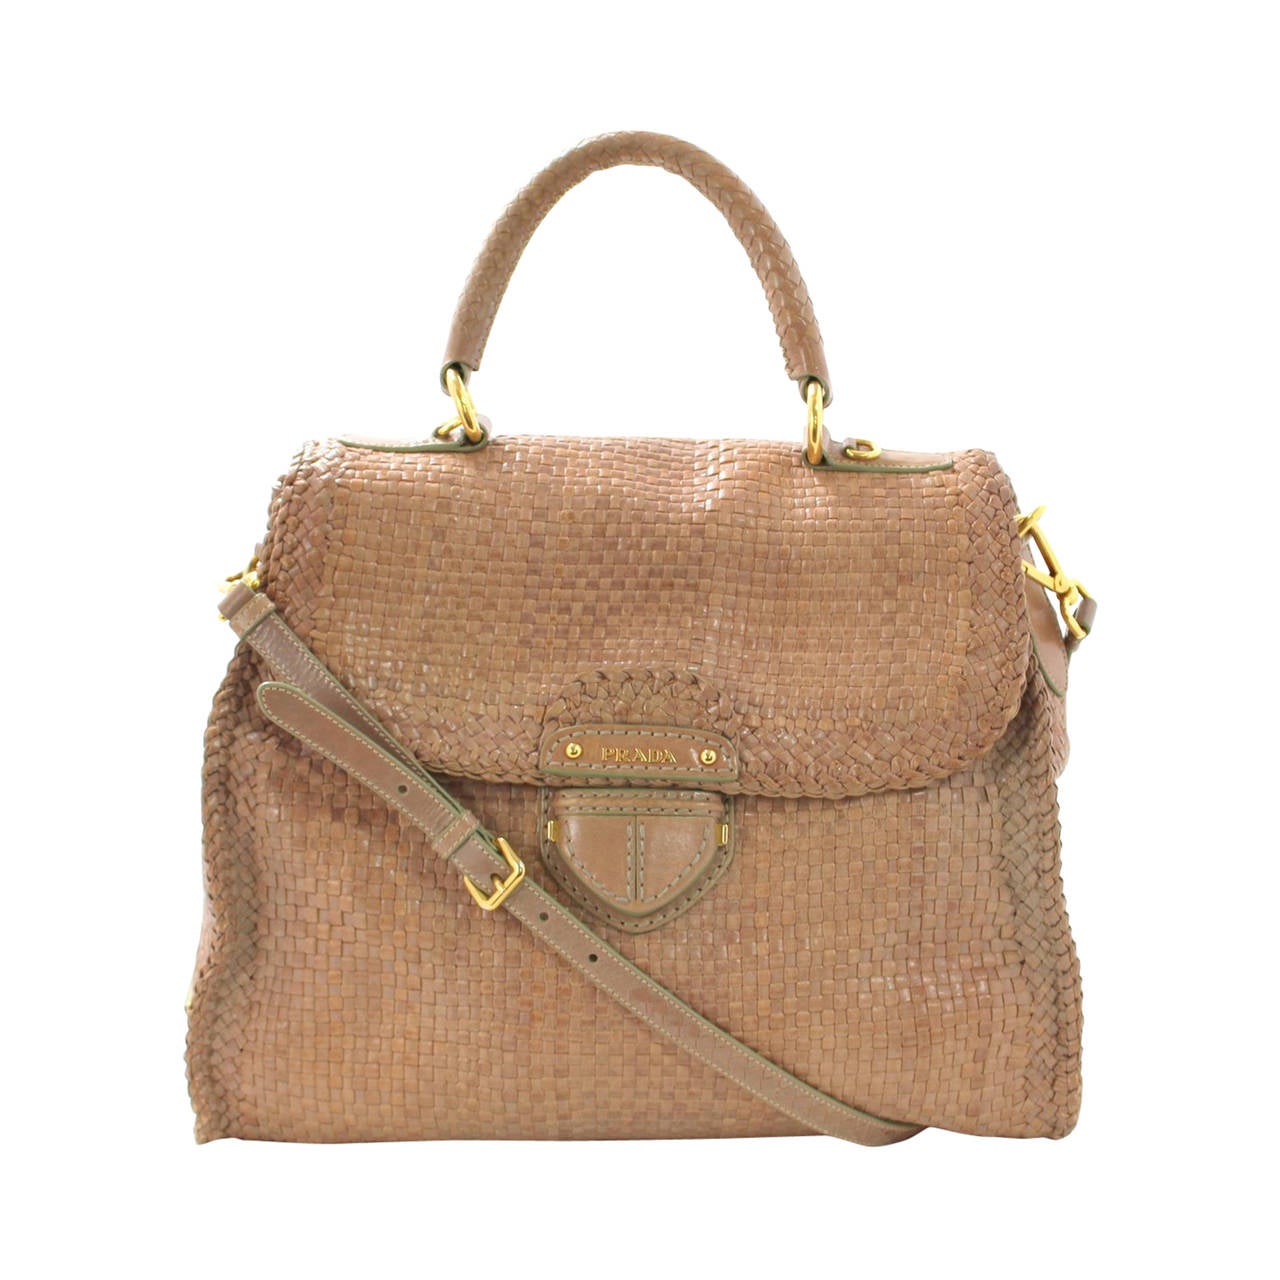 Prada Agave Woven Madras Top Handle Crossbody- Sold Out Nude color